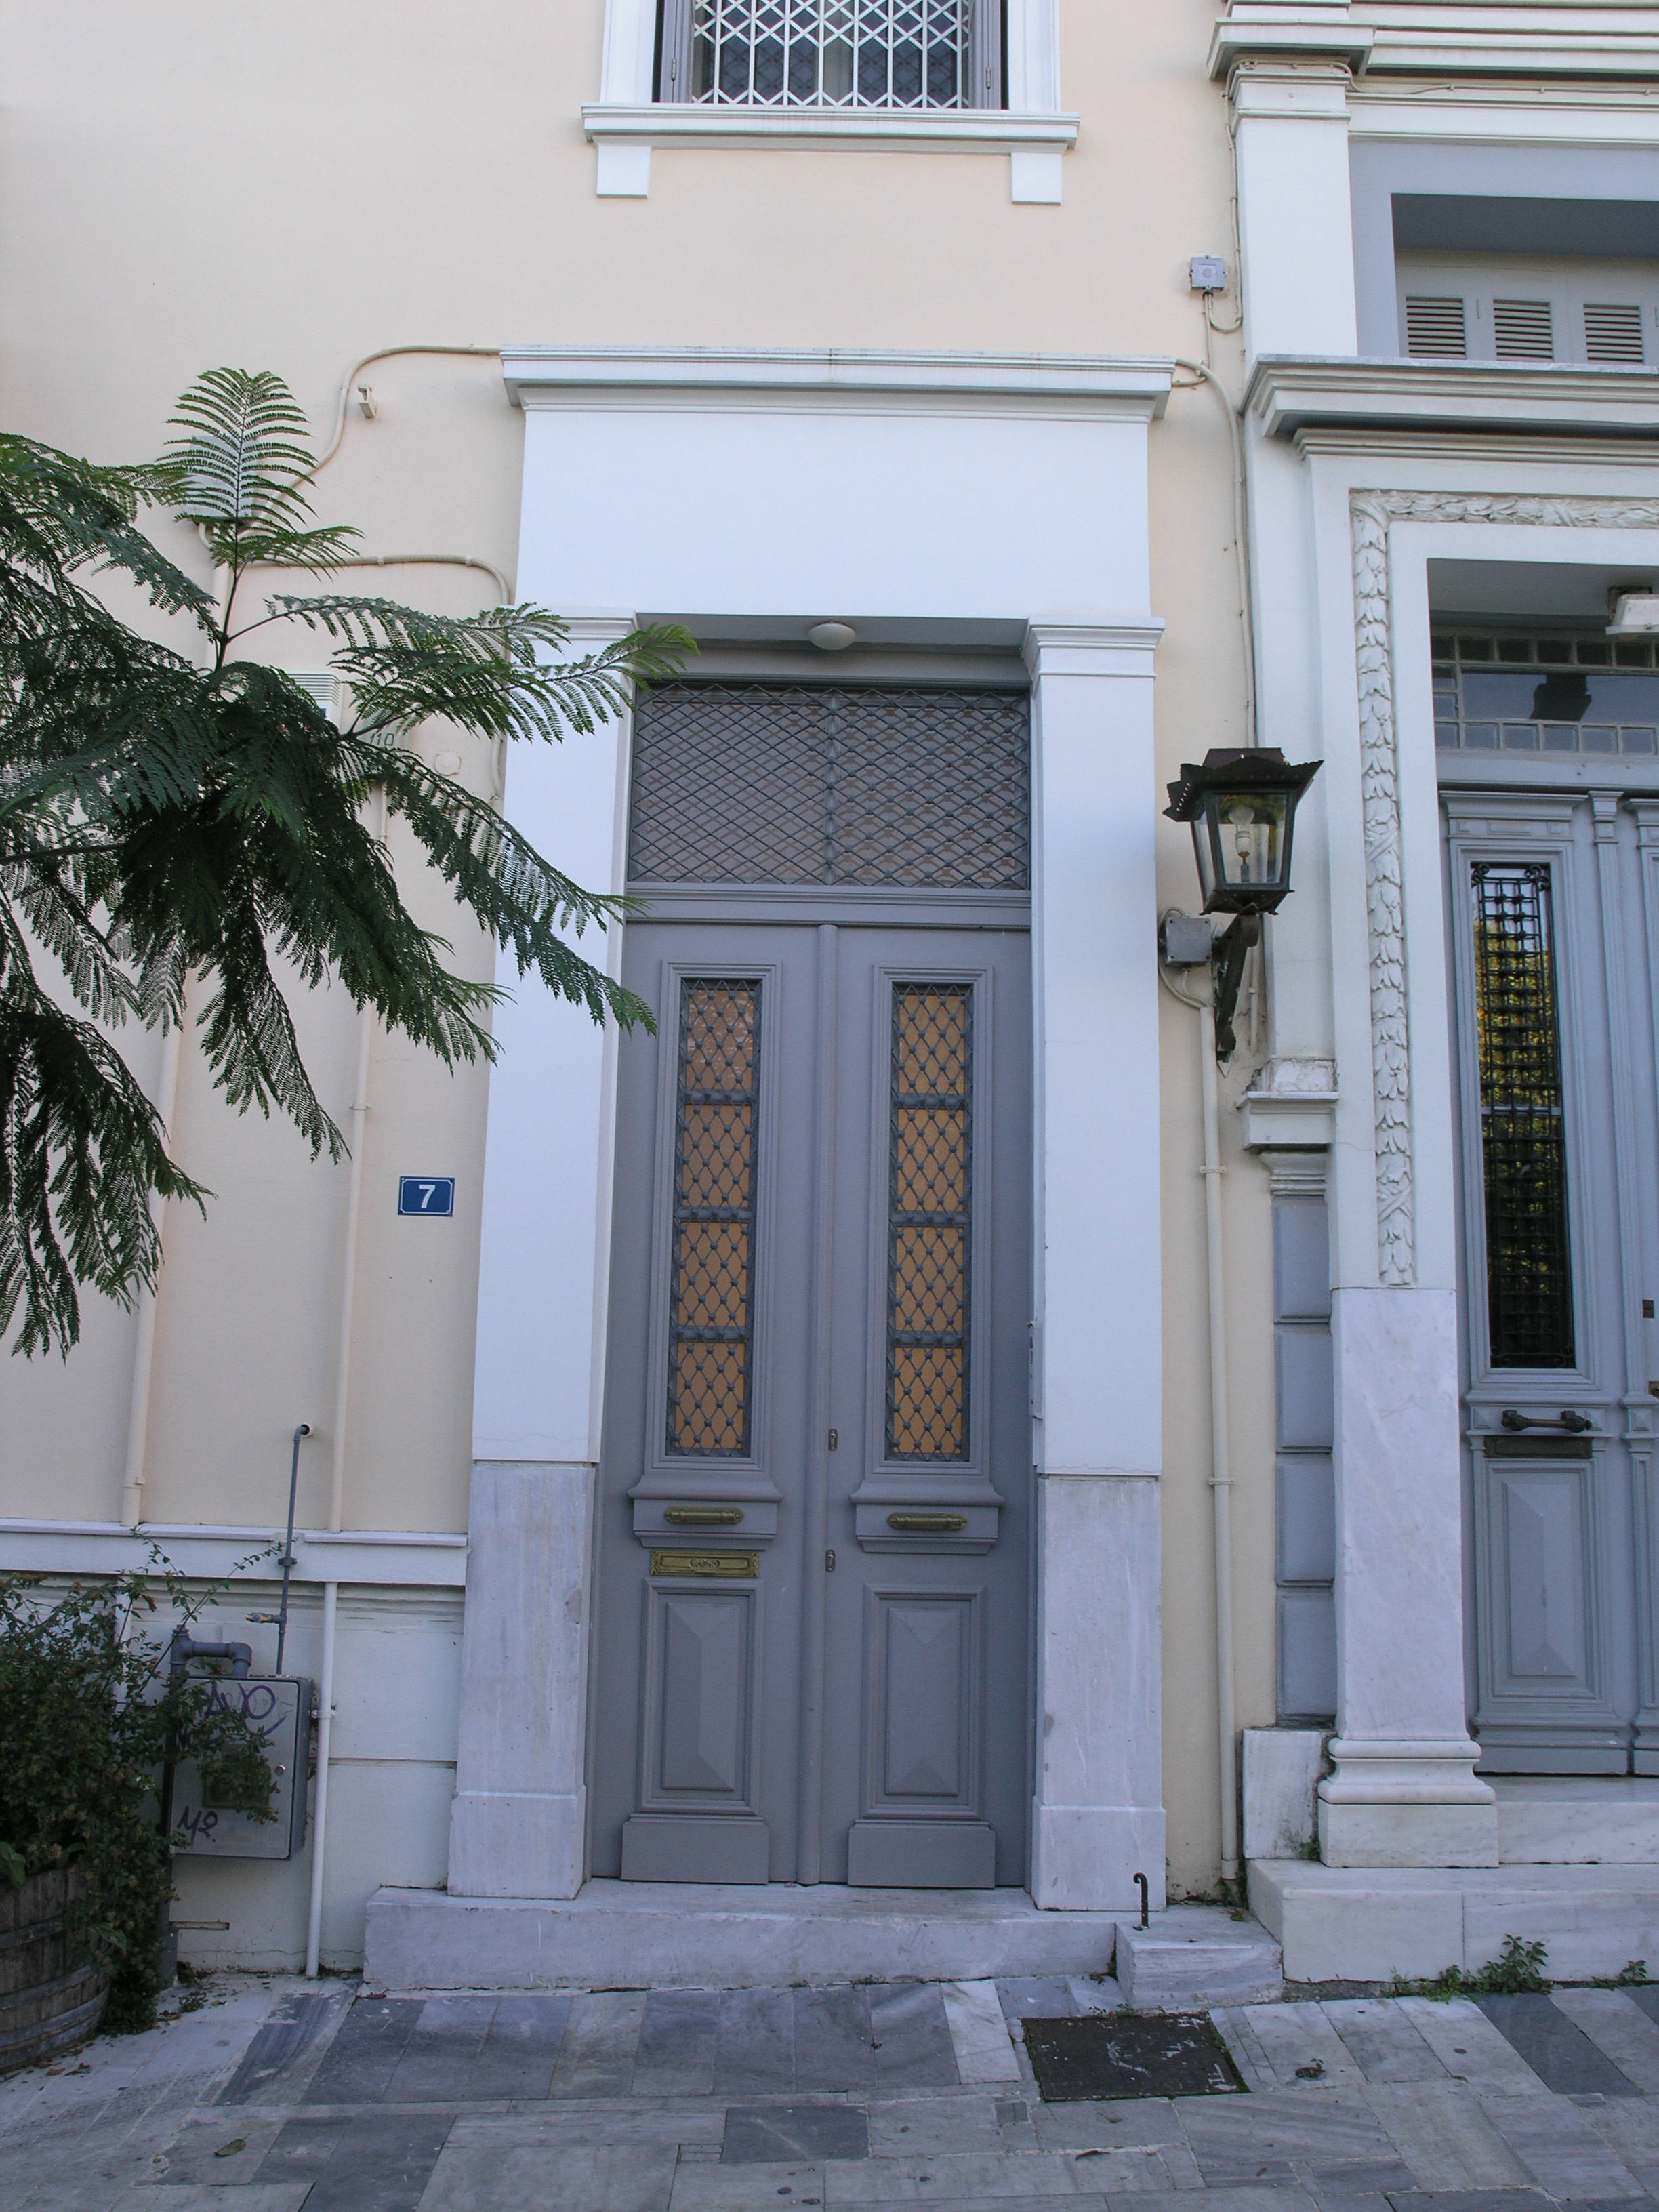 View of rigt side entrance